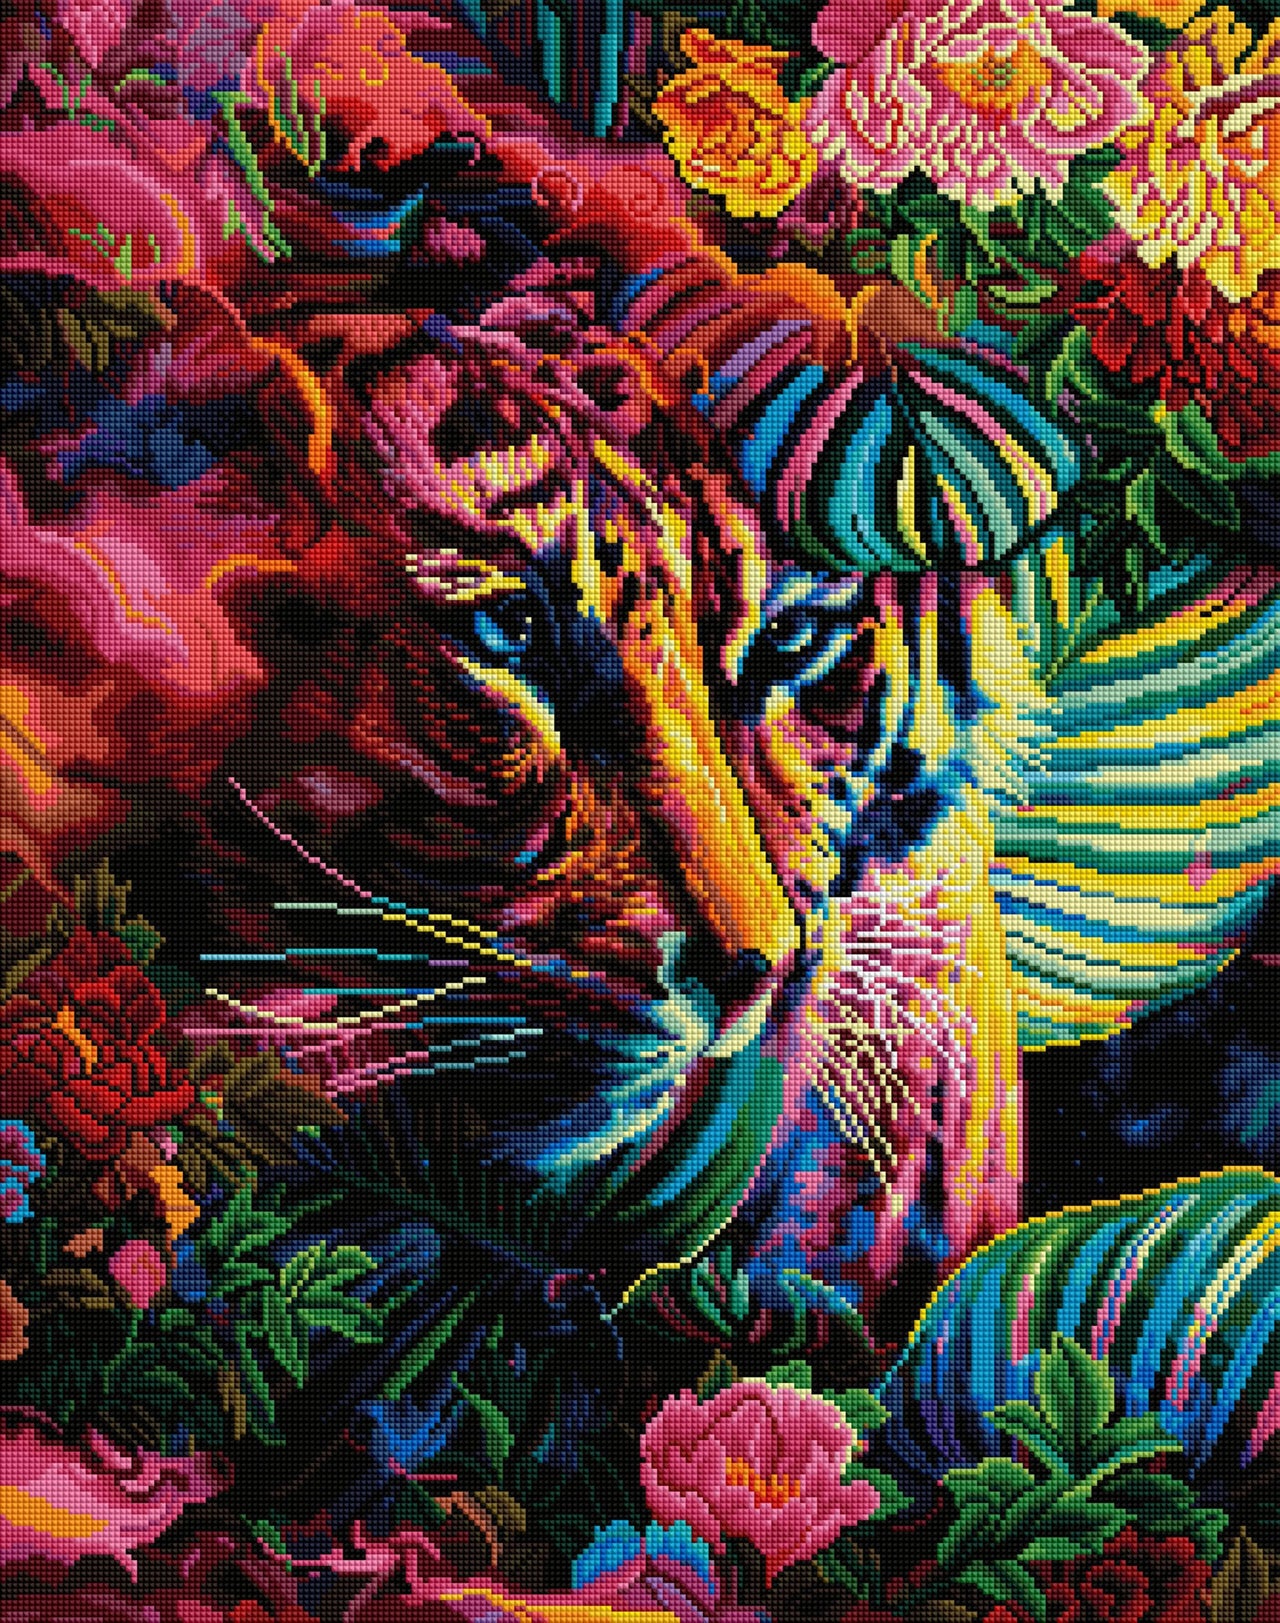 Diamond Painting Life of Tigers 22" x 28" (55.8cm x 70.7cm) / Square With 55 Colors Including 4 ABs / 63,616